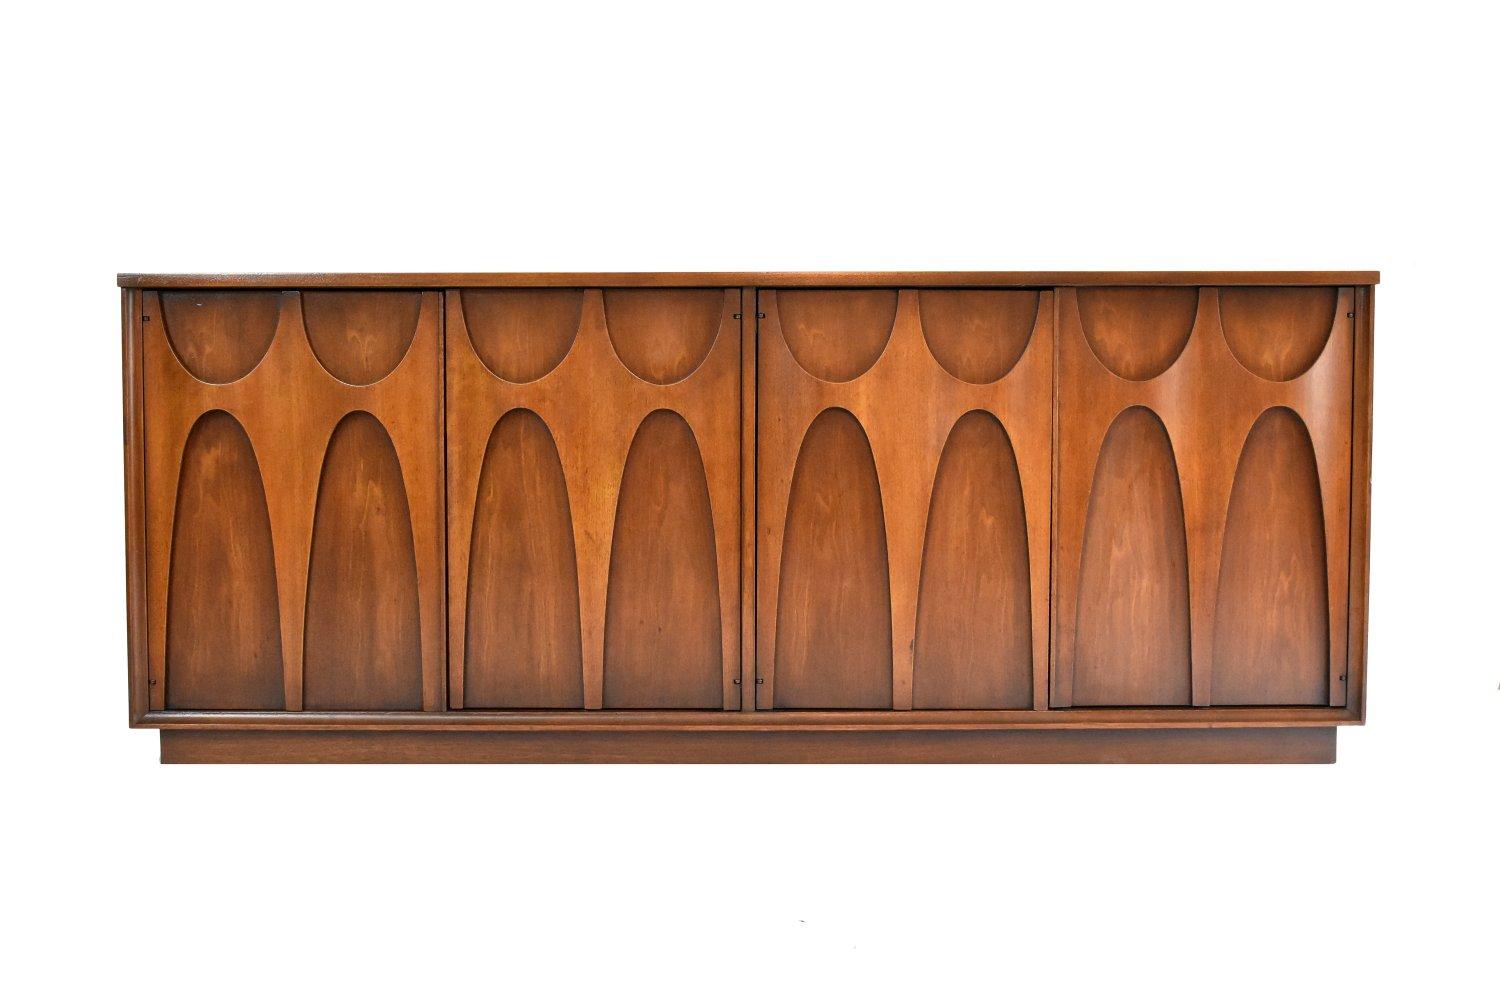 The largest and hard to find piece in the Brasilia collection by Broyhill, this stunning midcentury hutch and buffet remains in nearly pristine condition. The hutch is lit, and has two glass shelves for display. The credenza buffet features unique,